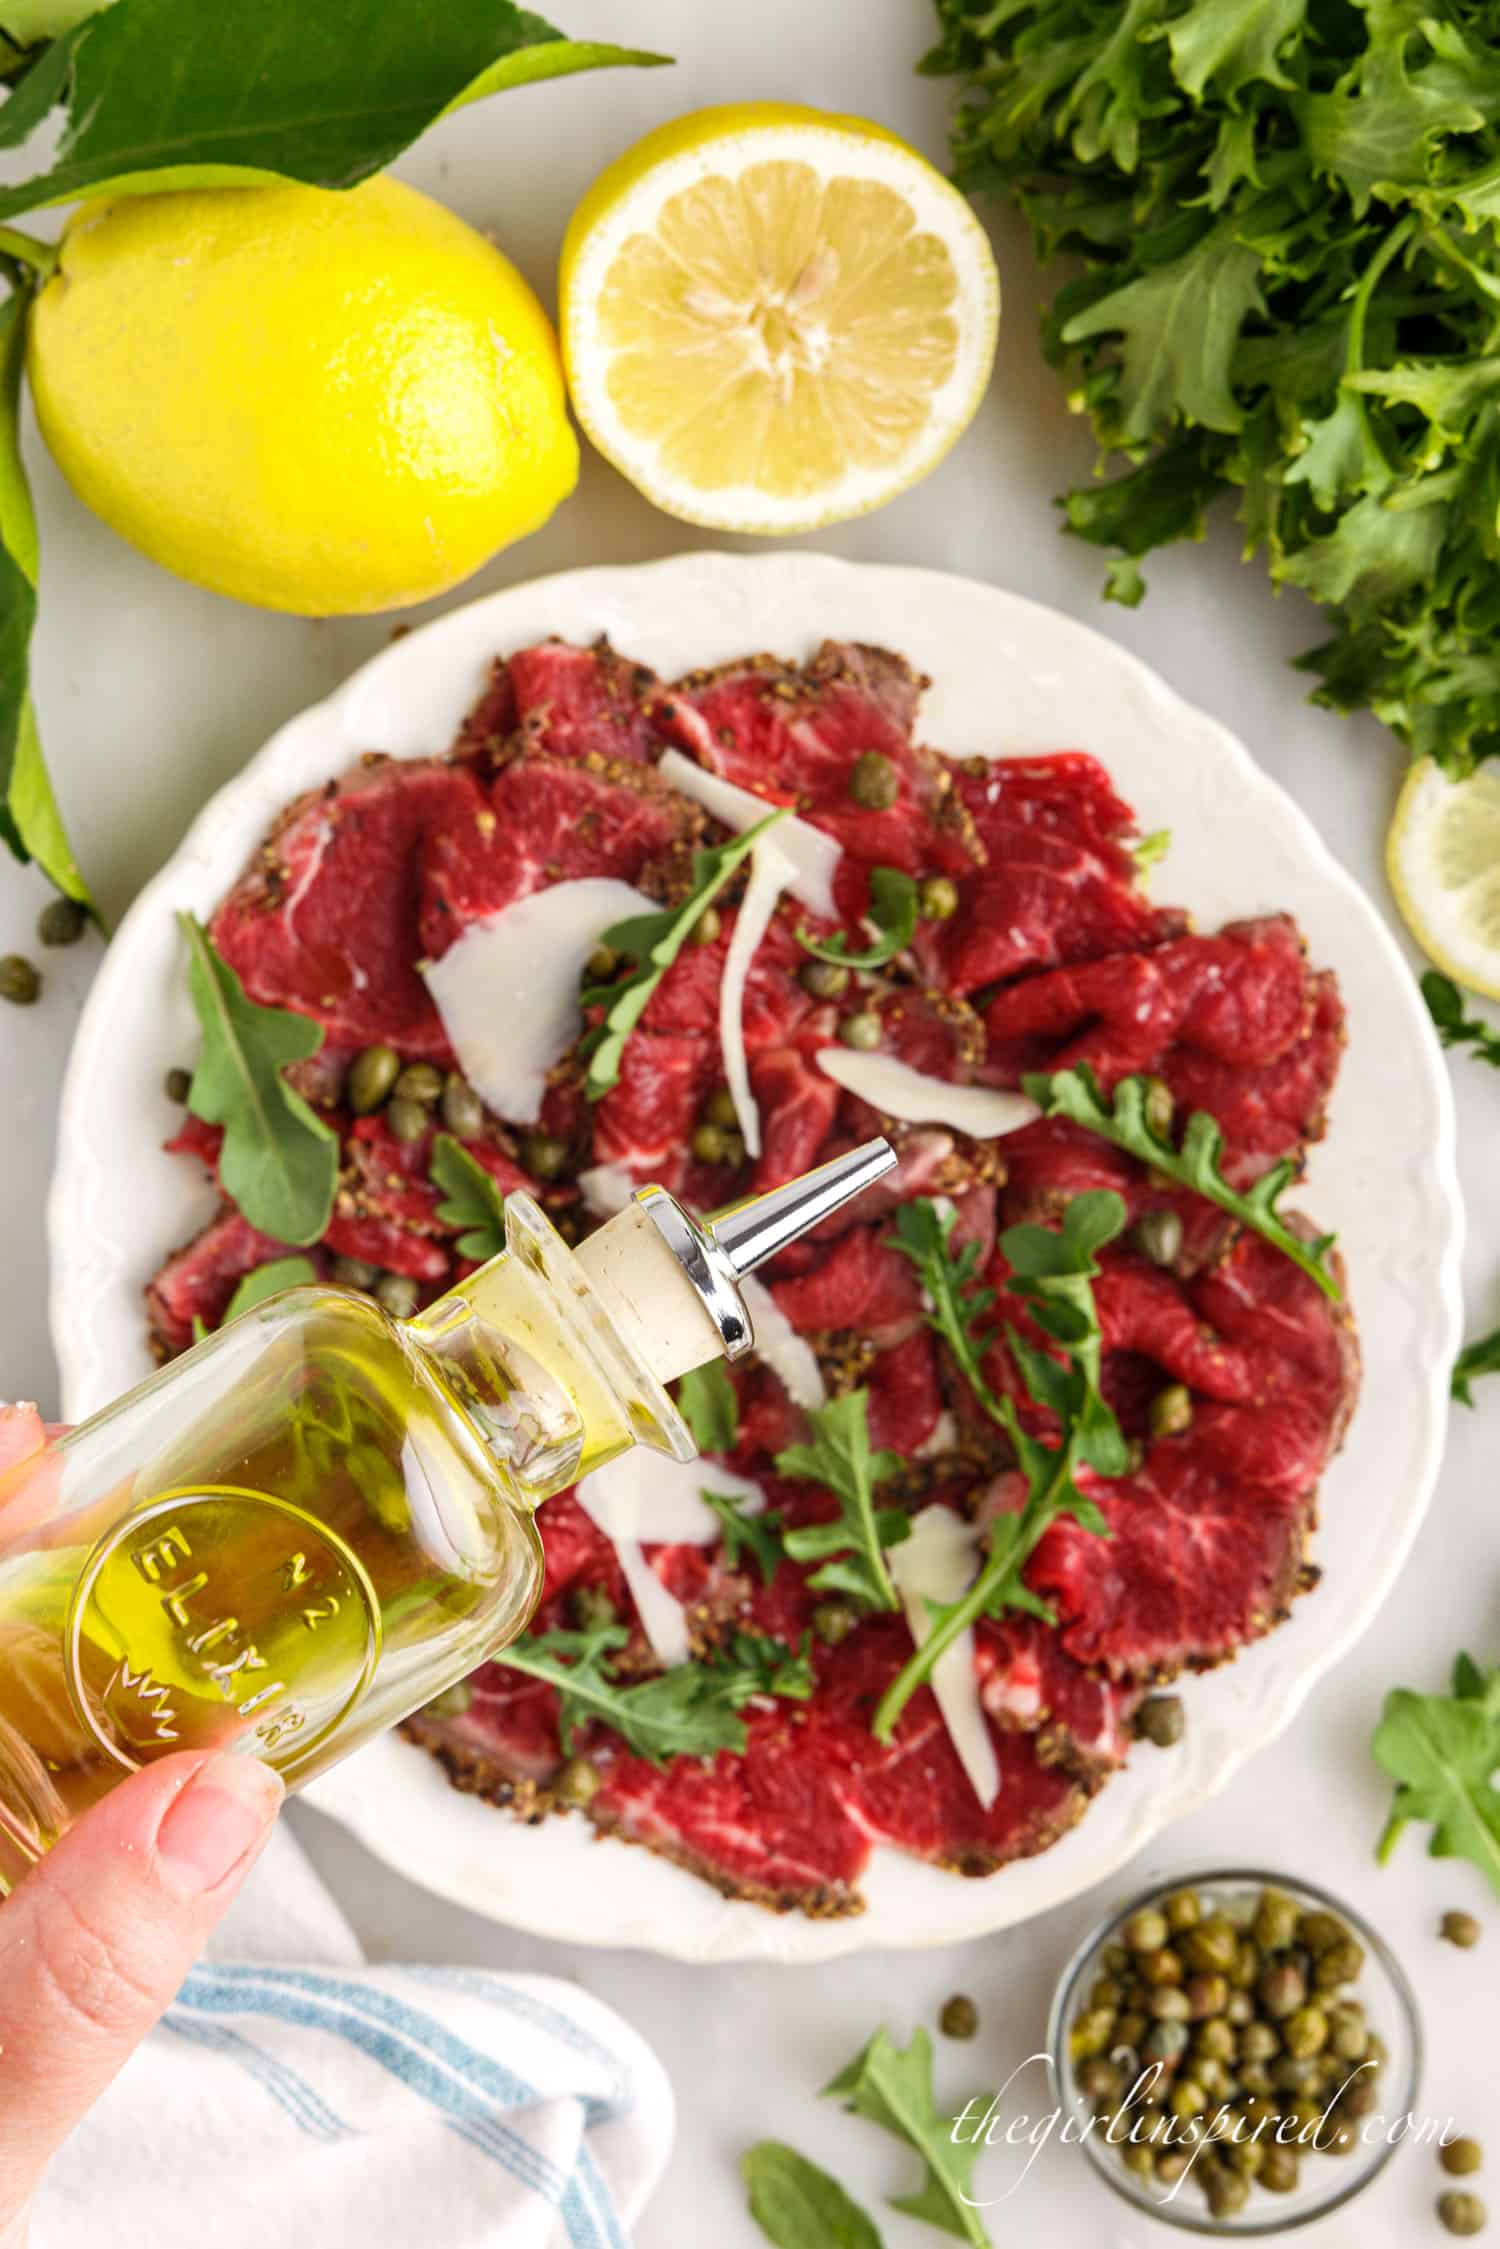 Oil drizzled over Beef Carpaccio on a plate.